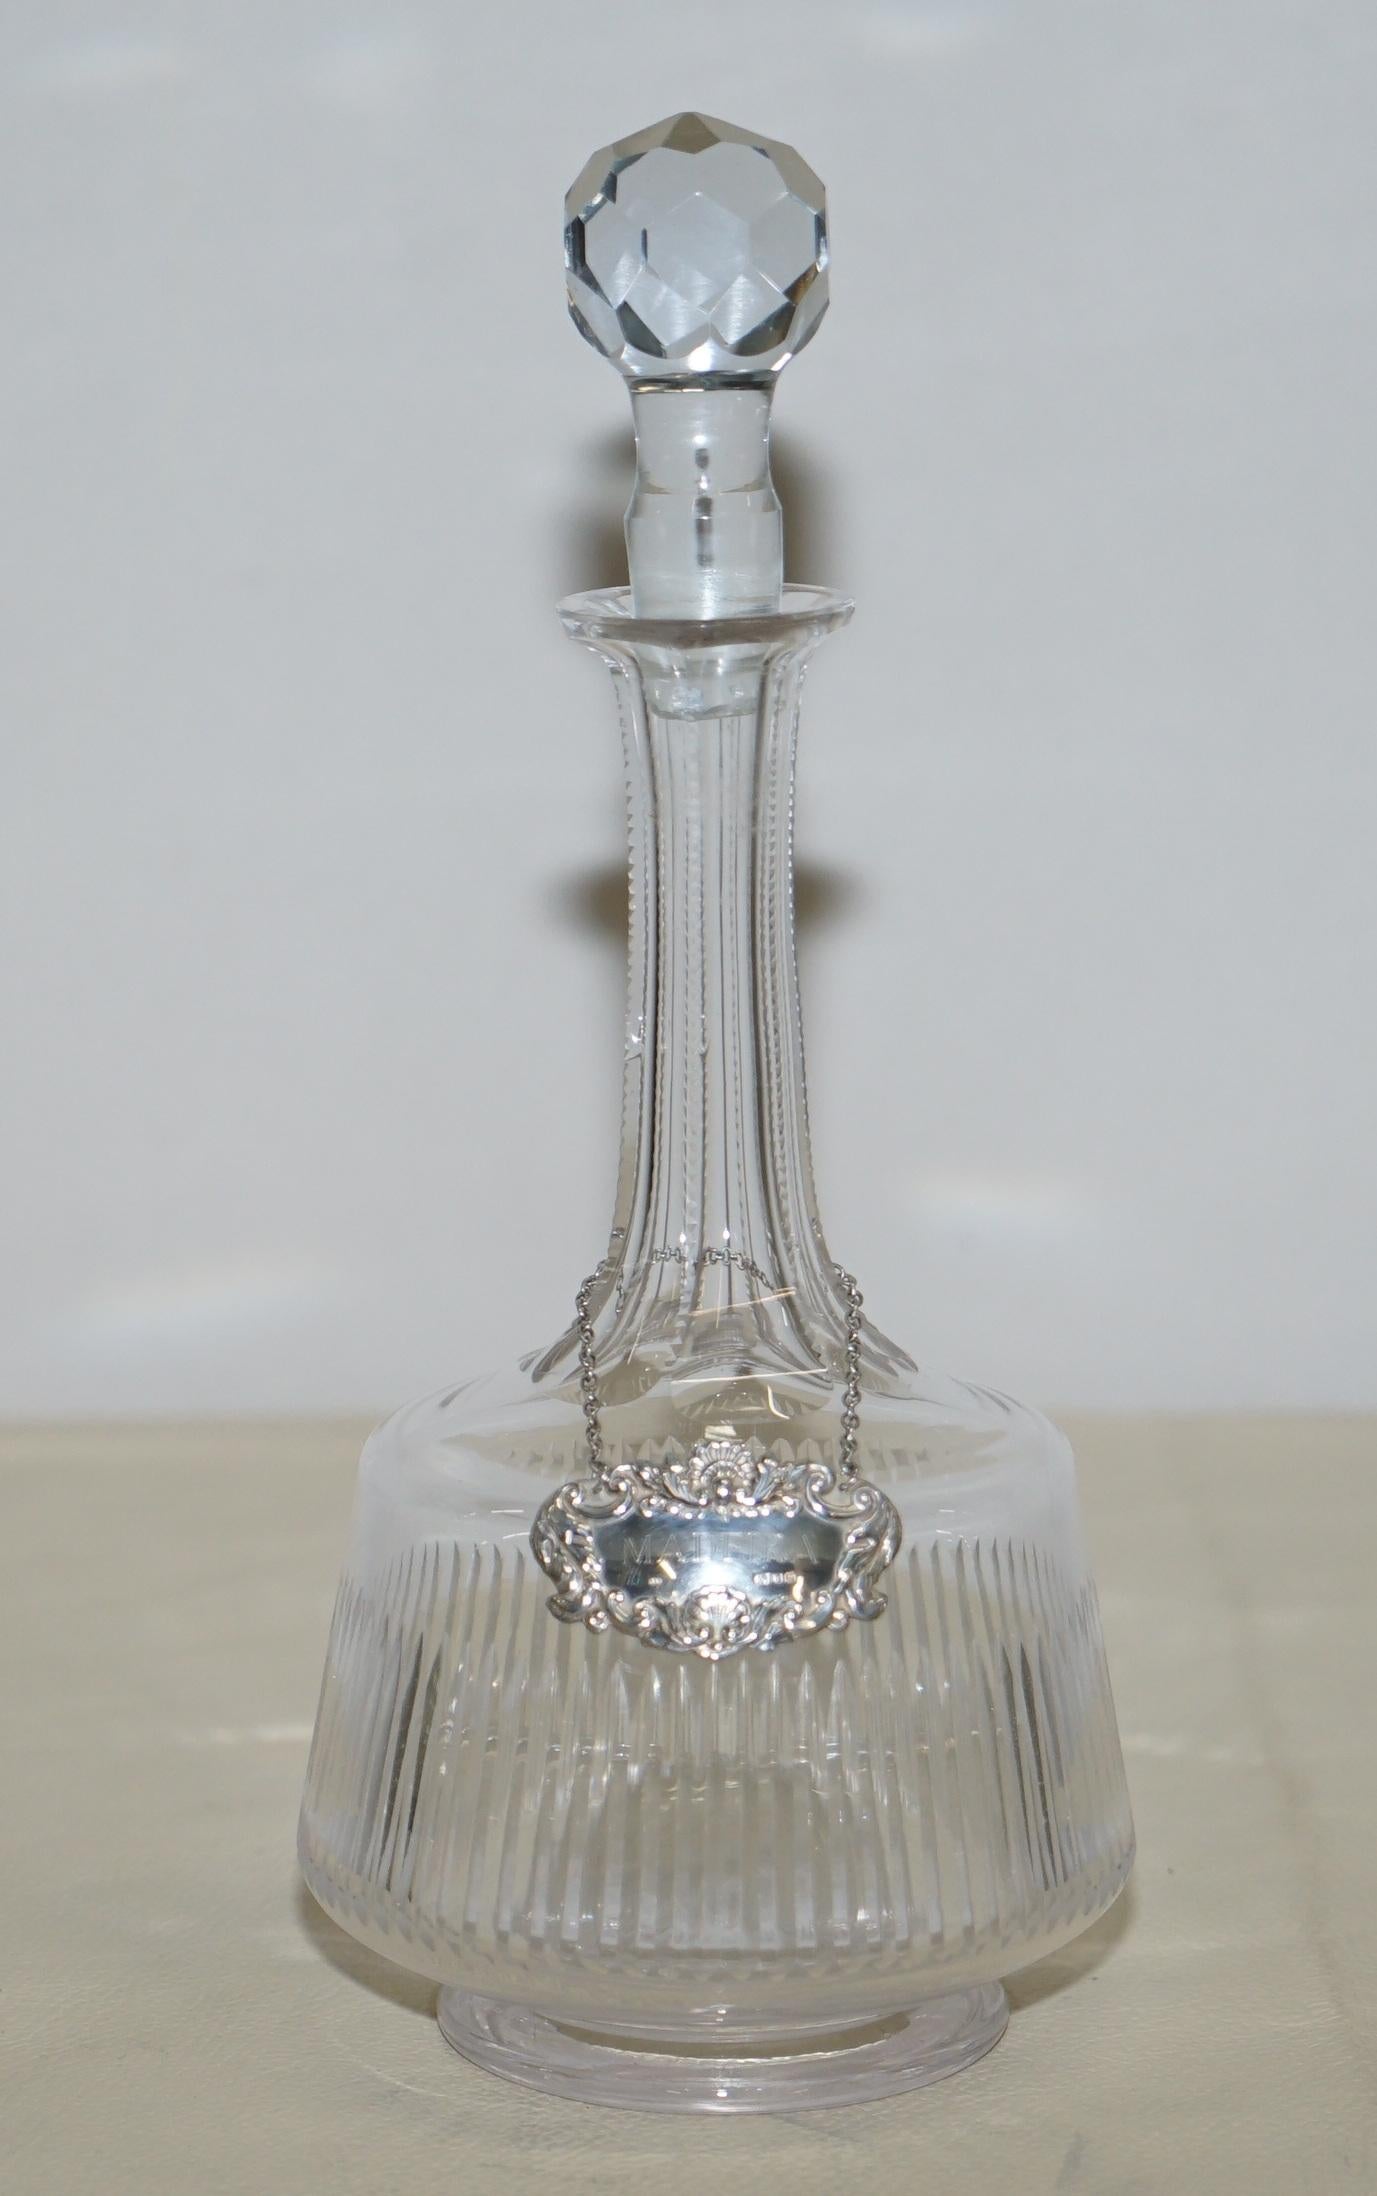 We are delighted to offer for sale sublime cut glass crystal decanter with sterling silver Maderia hanging label

A good looking and decorative piece, the hanging collar is clearly hallmarked with the sideways facing Lion for 925 sterling silver,